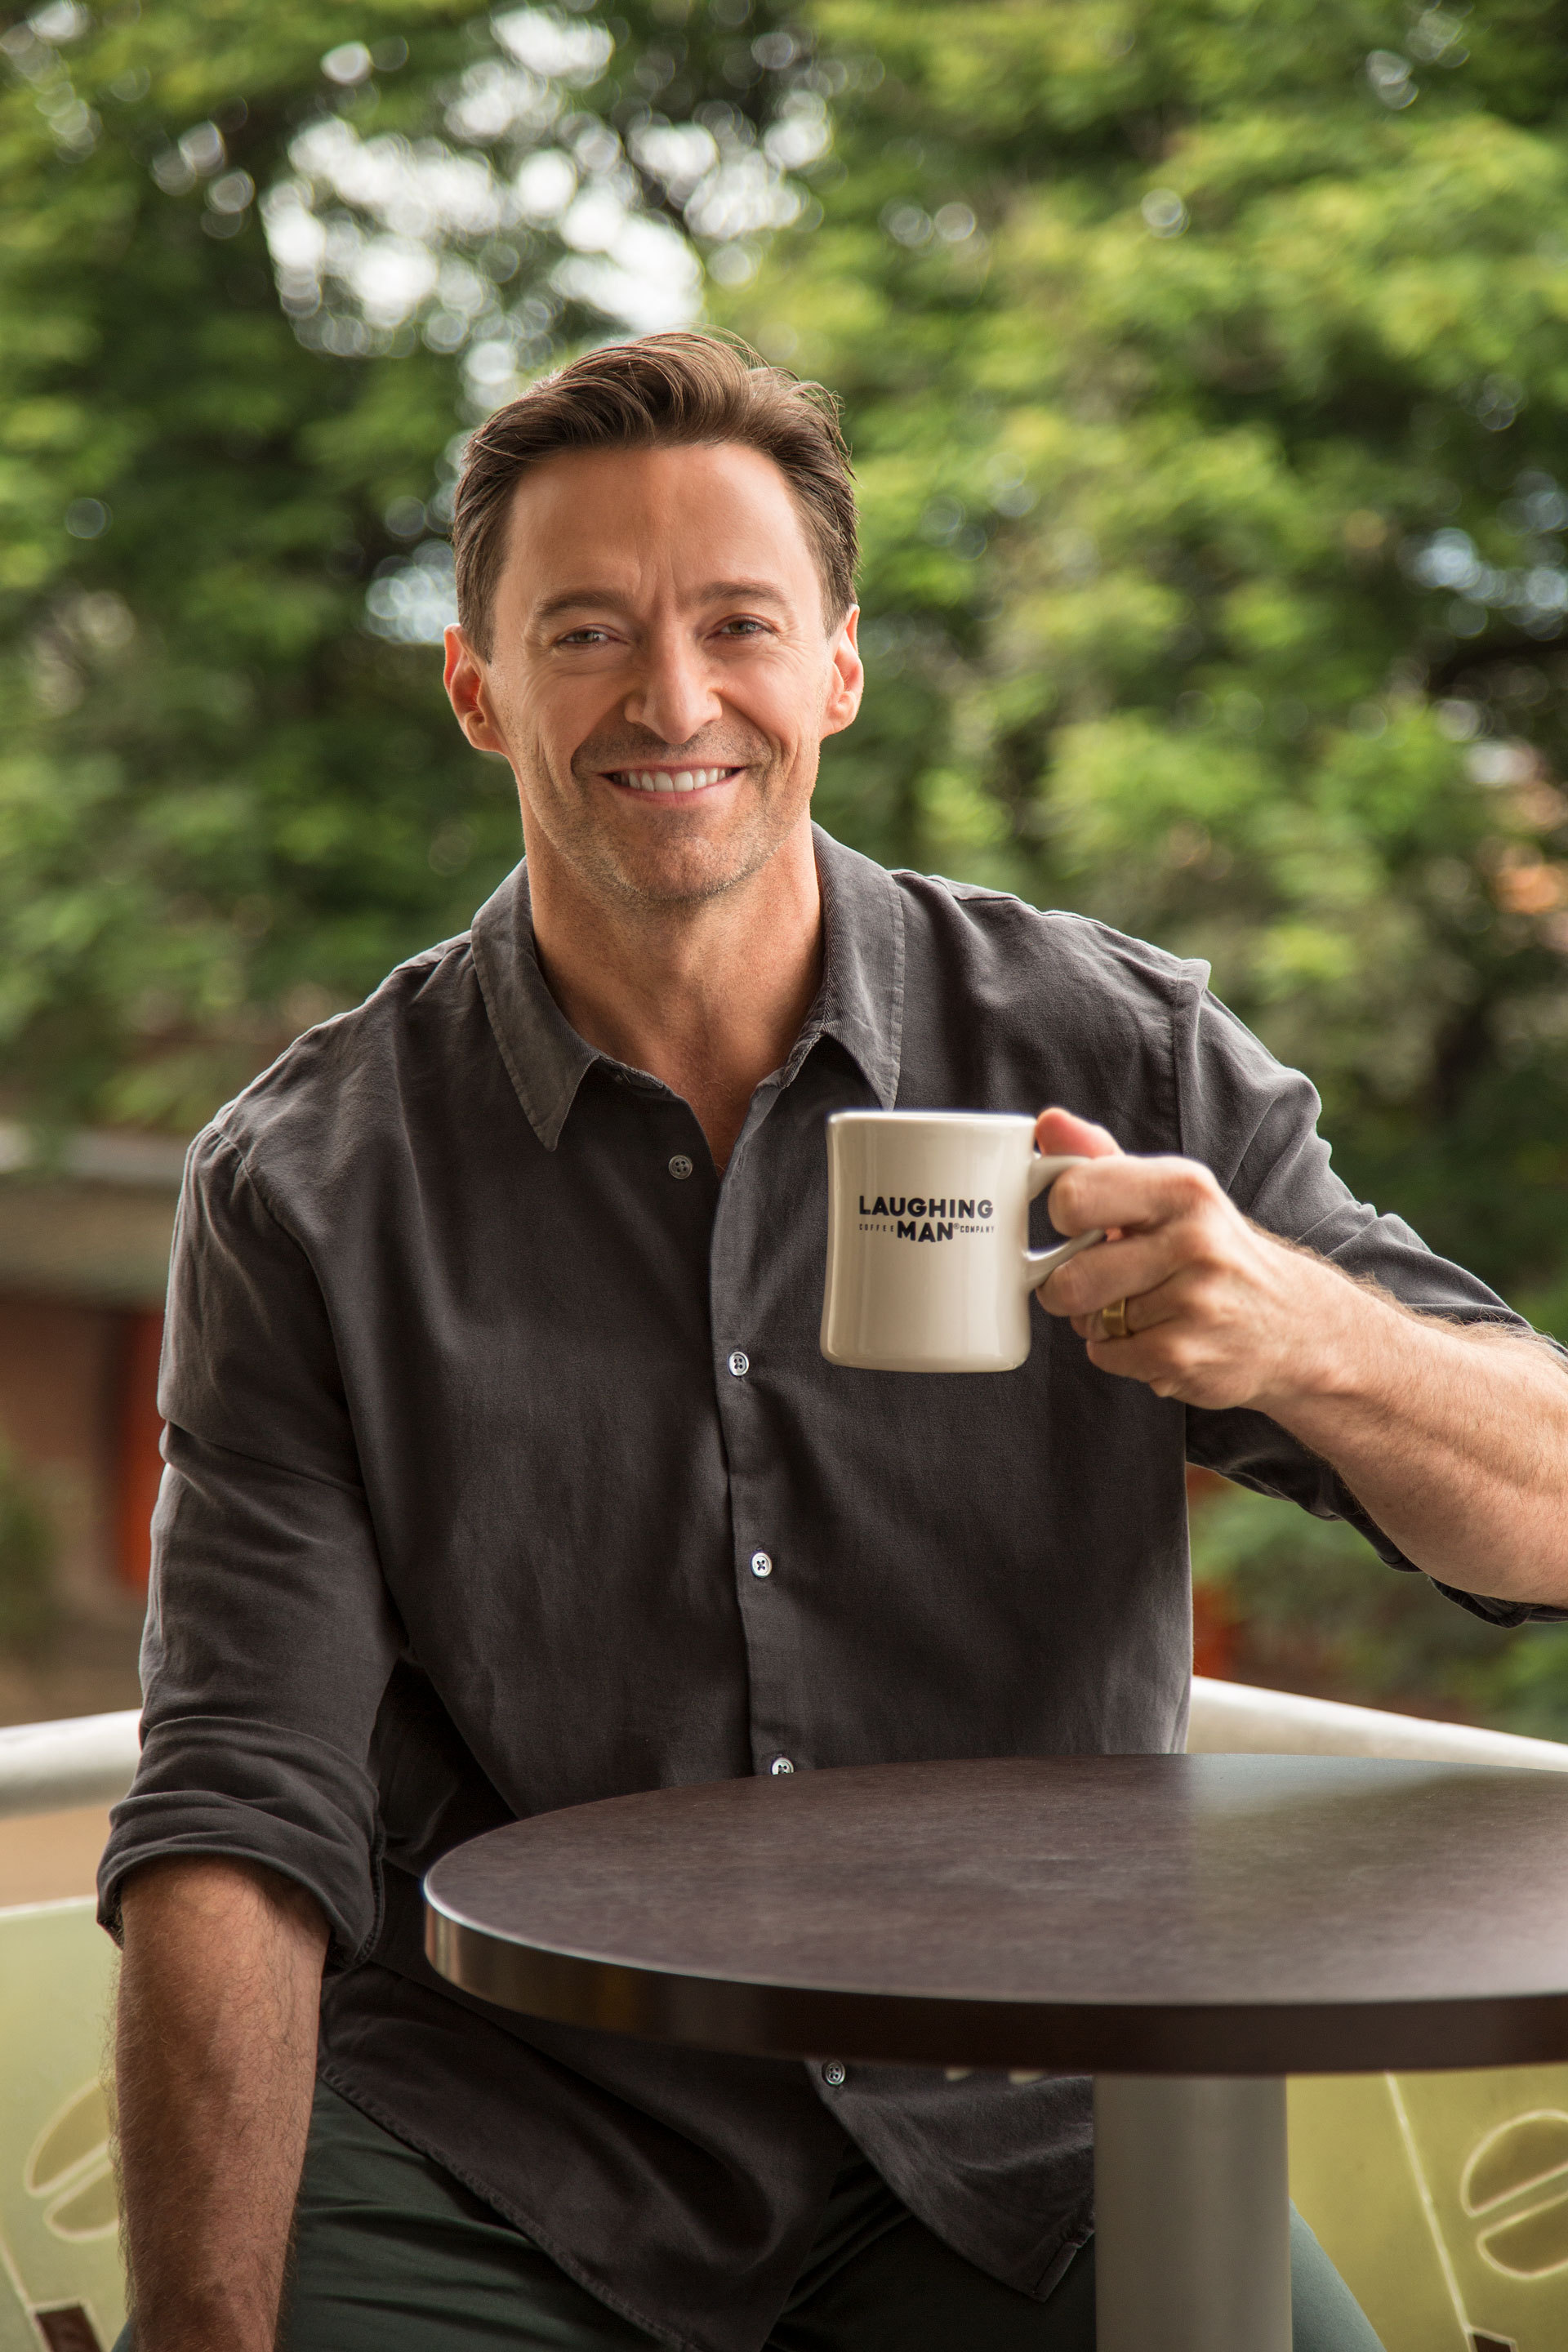 Laughing Man® Coffee and Hugh Jackman Inspire Consumers to 'Make ...